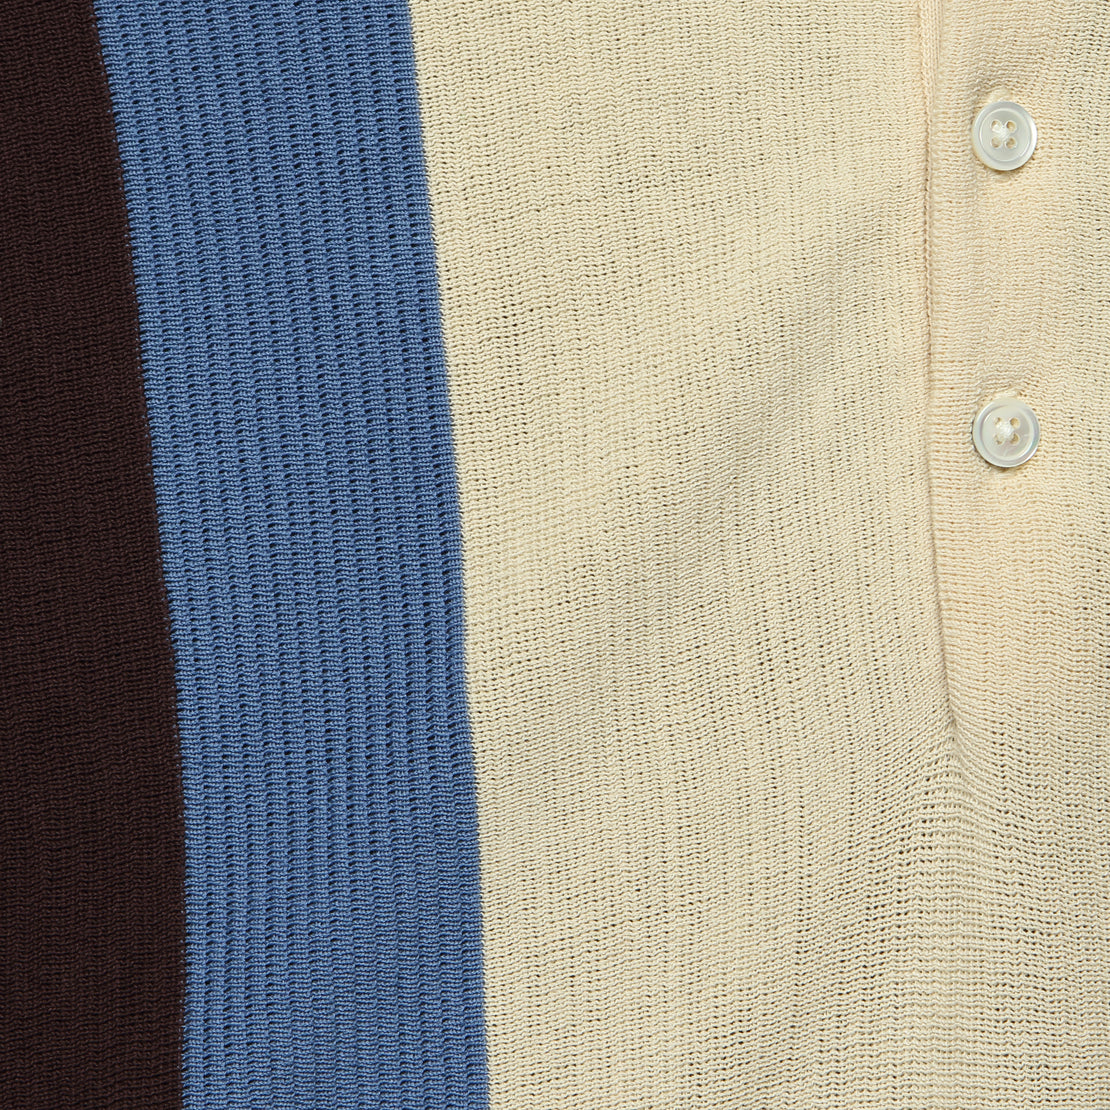 Striped Knit Polo - Brown/Sax/Ecru - BEAMS+ - STAG Provisions - Tops - S/S Knit